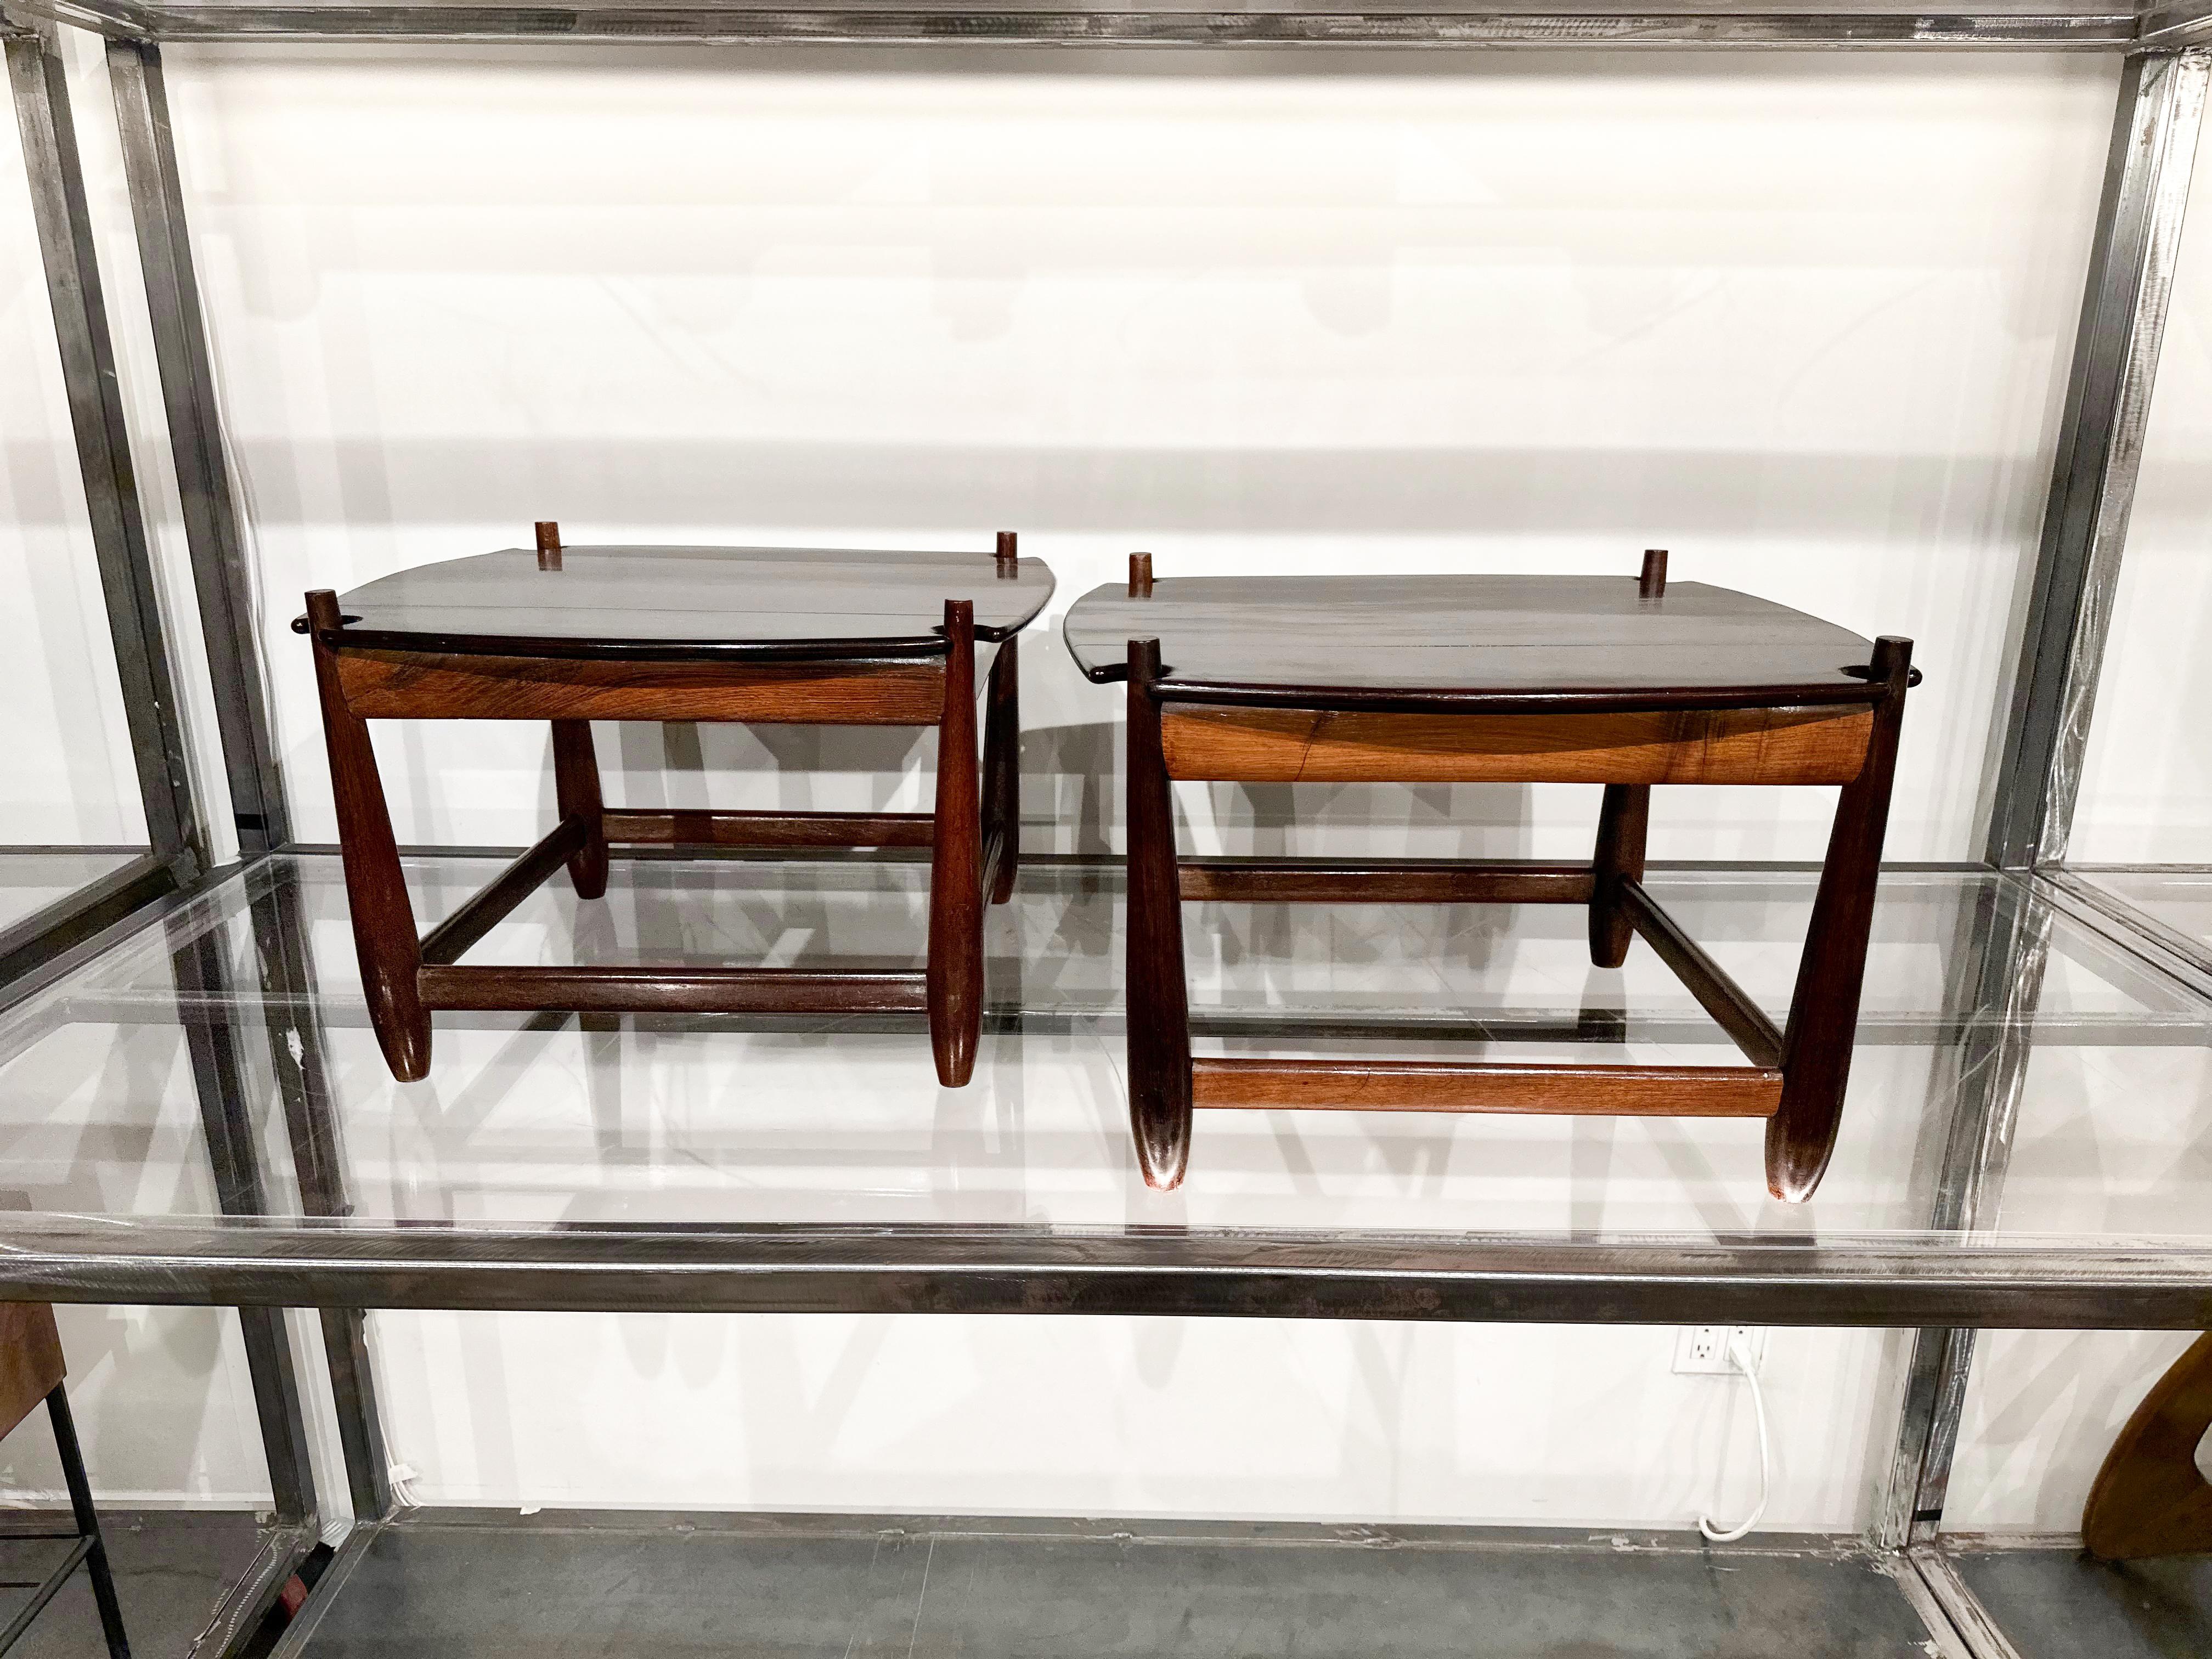 Available today in NYC with free shipping included, these SUPER rare Brazilian Modern “Arimelo” Side Tables in Hardwood, Sergio Rodrigues, 1958 are nothing less than the find of the year!

The “Arimelo” Side tables have a Brazilian rosewood (also